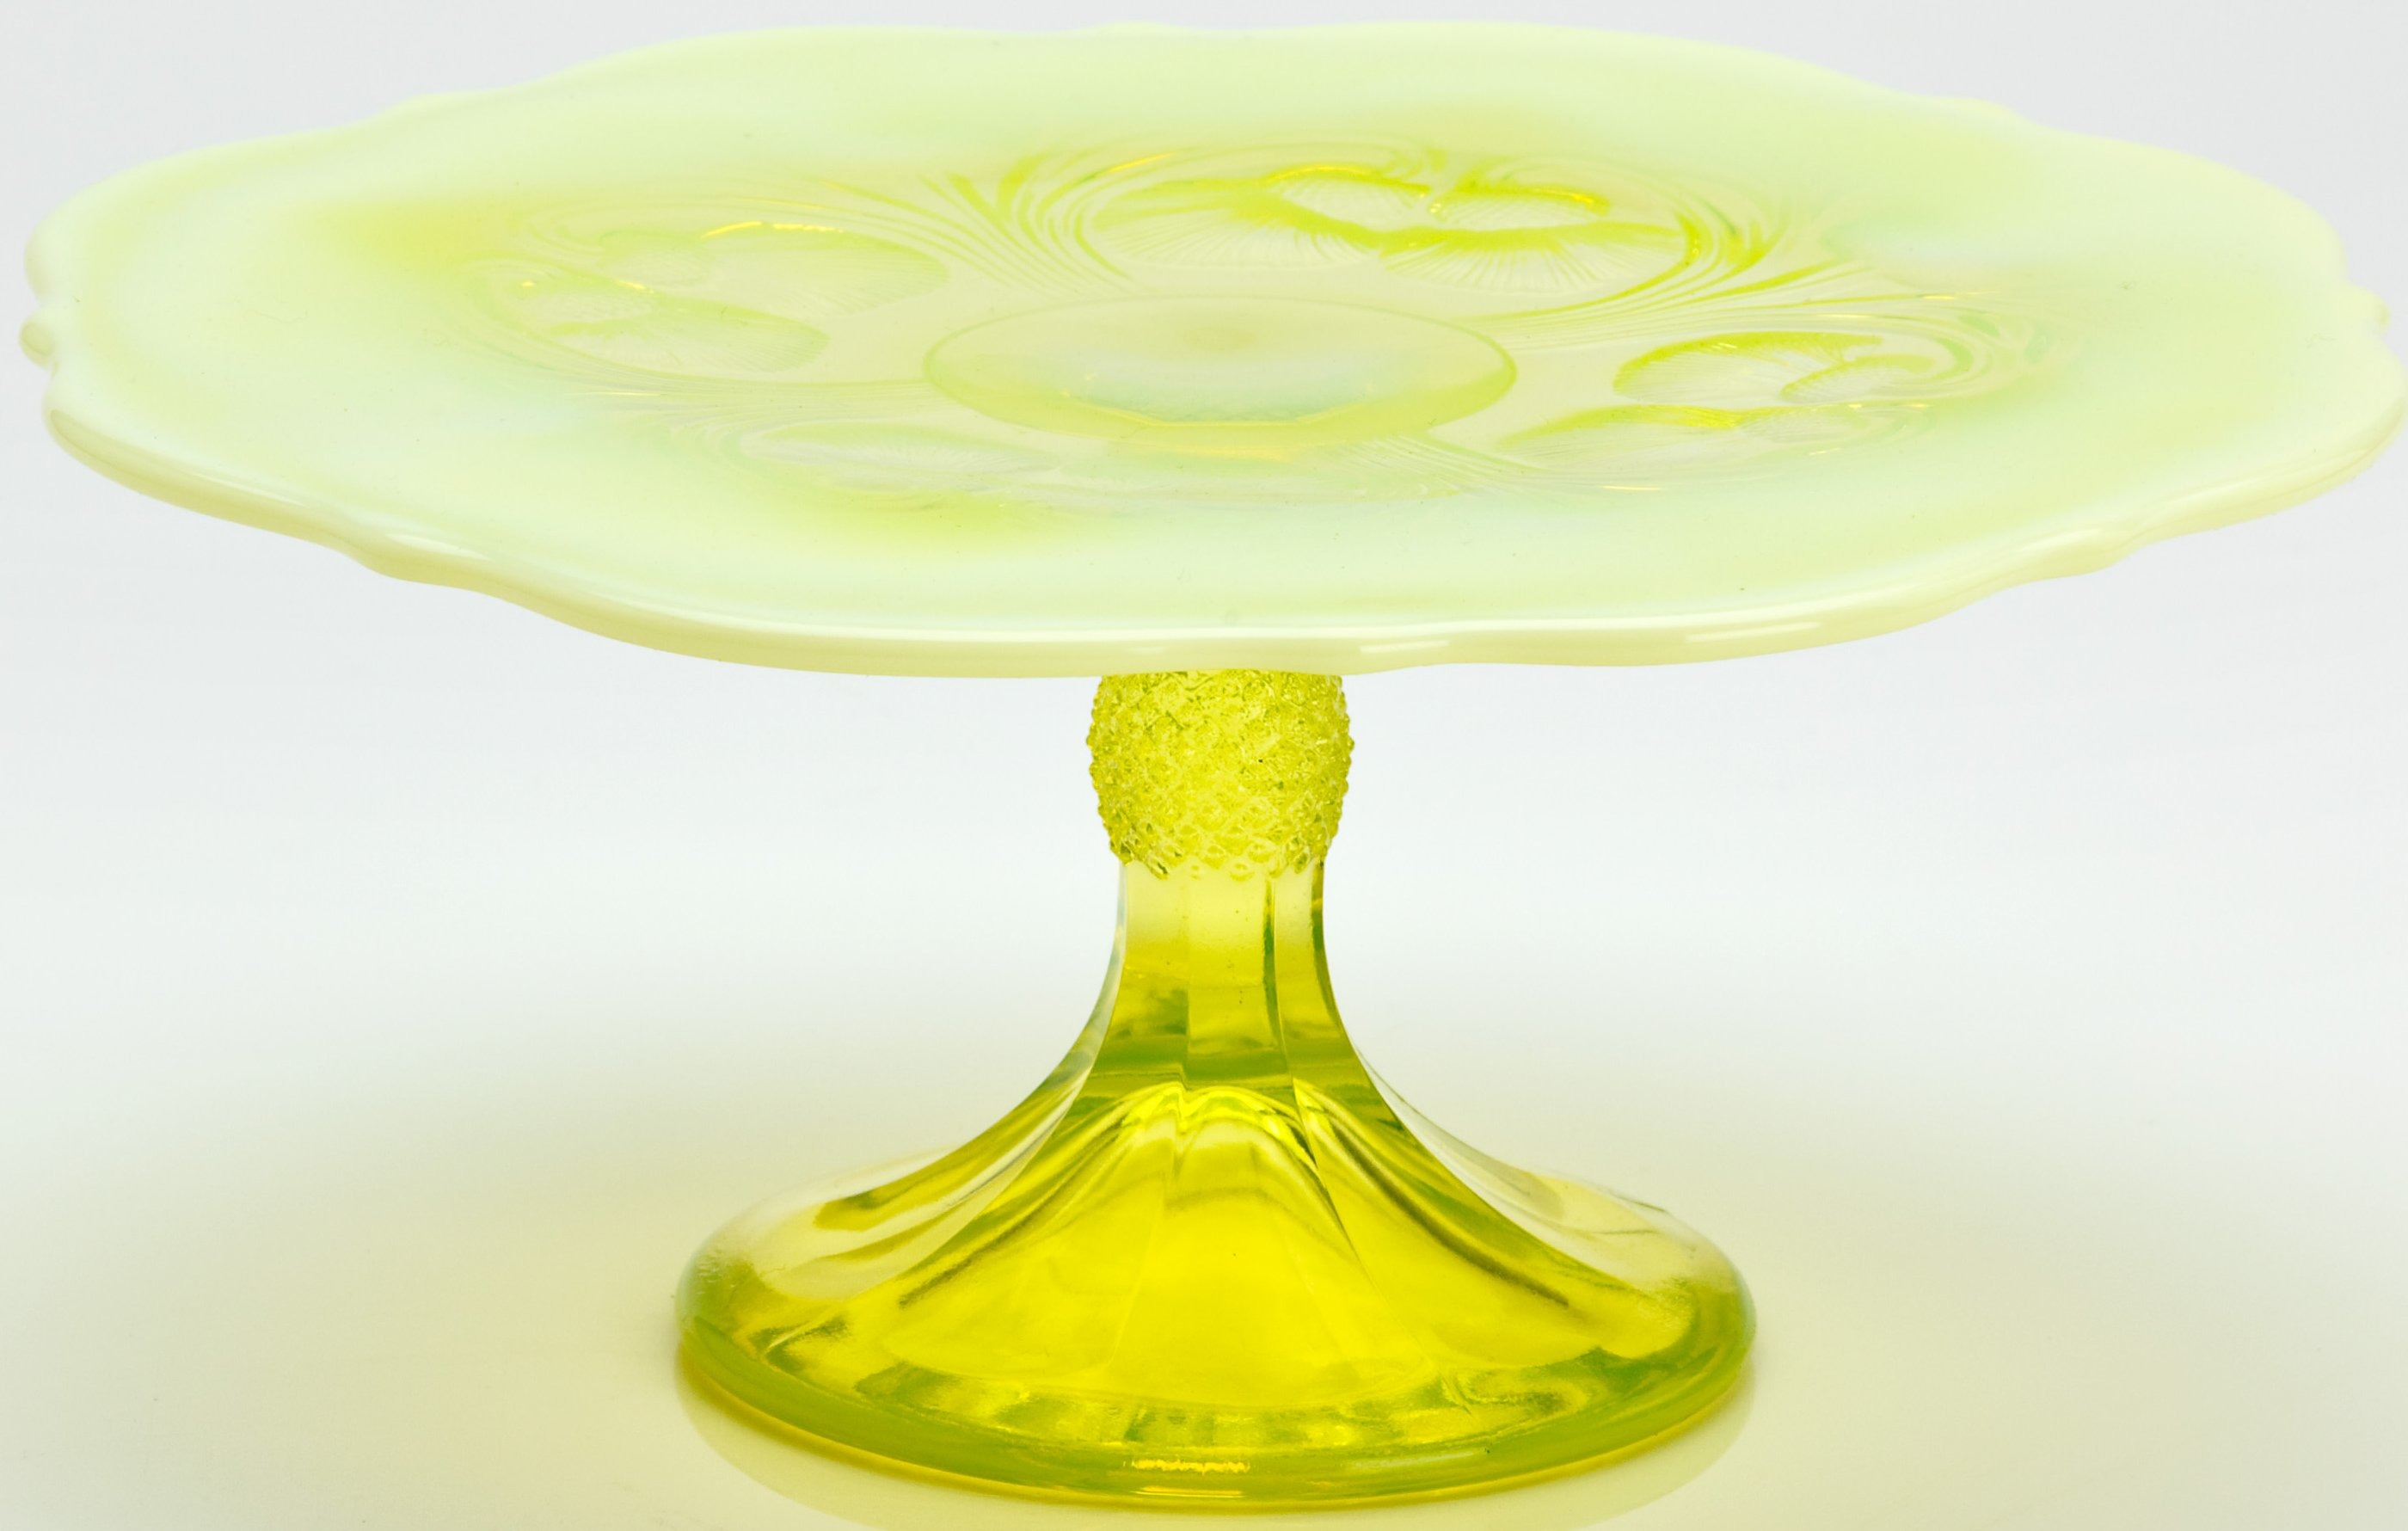 Mosser Glass 17911CPVaselineOpal Inverted Thistle Set 179 Cake Plate Small Cake Stand Vaseline Opal